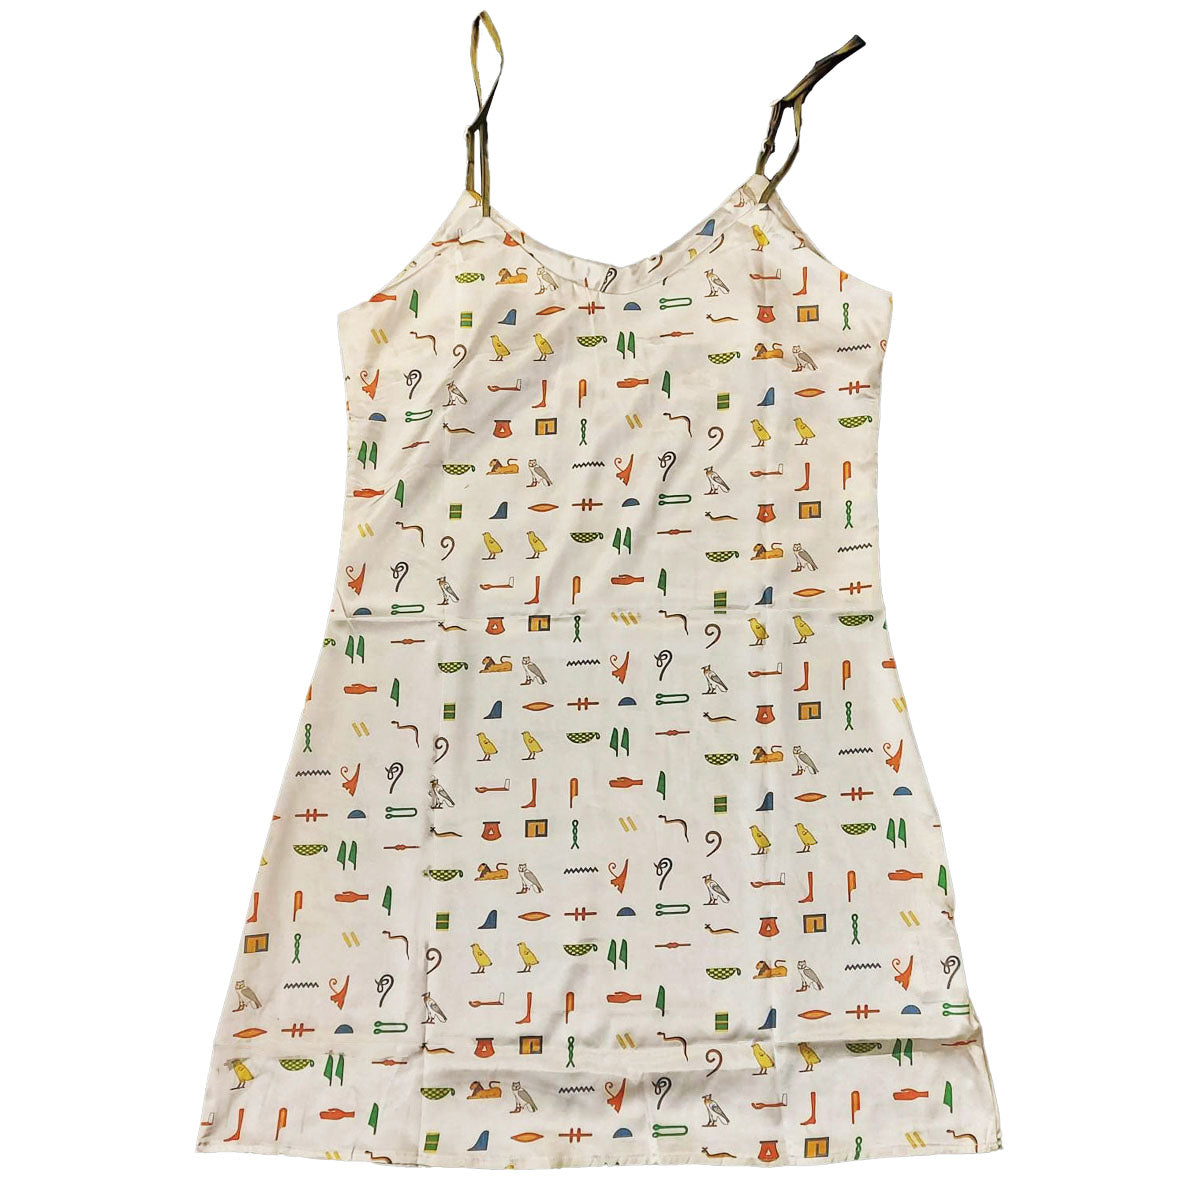 Hieroglyphics Sublimated Ladies Nightgown (white)